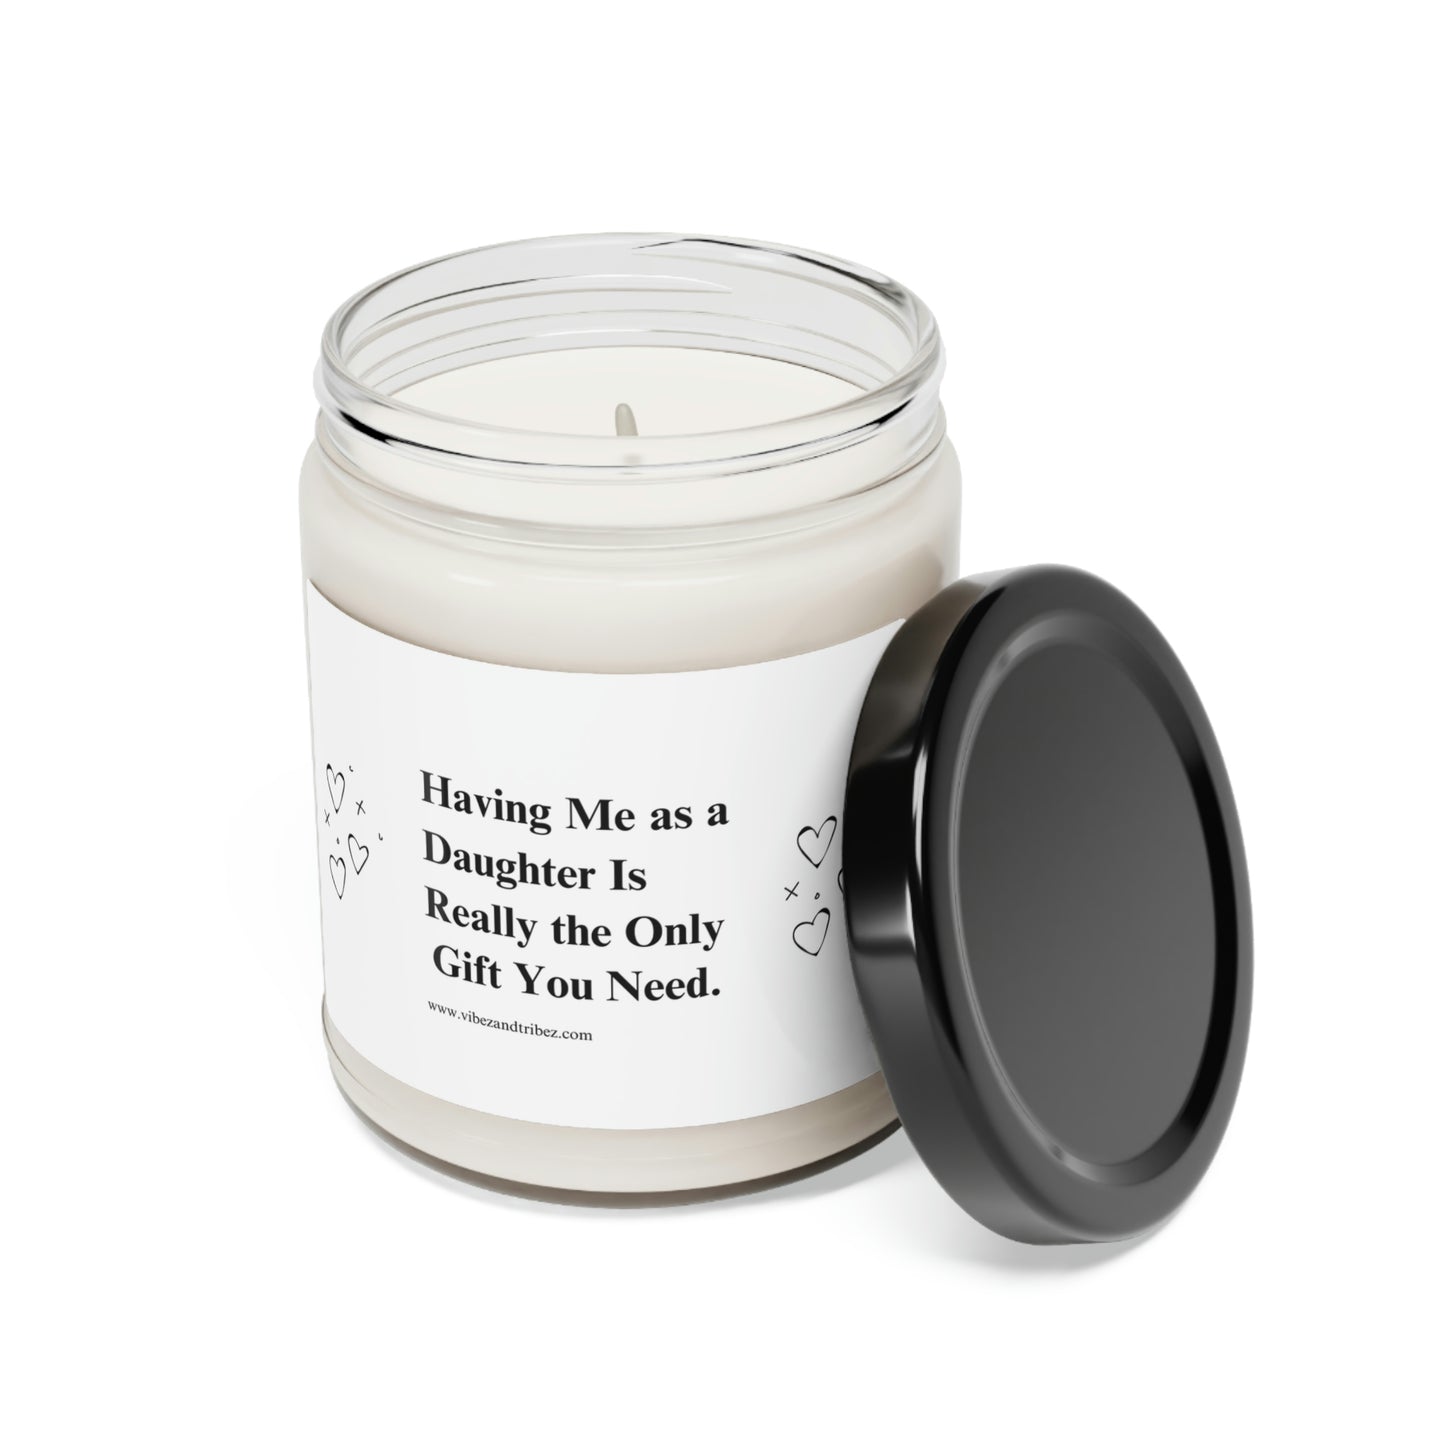 Having me as a Daughter is really the only gift needed - Scented Soy Candle, 9oz